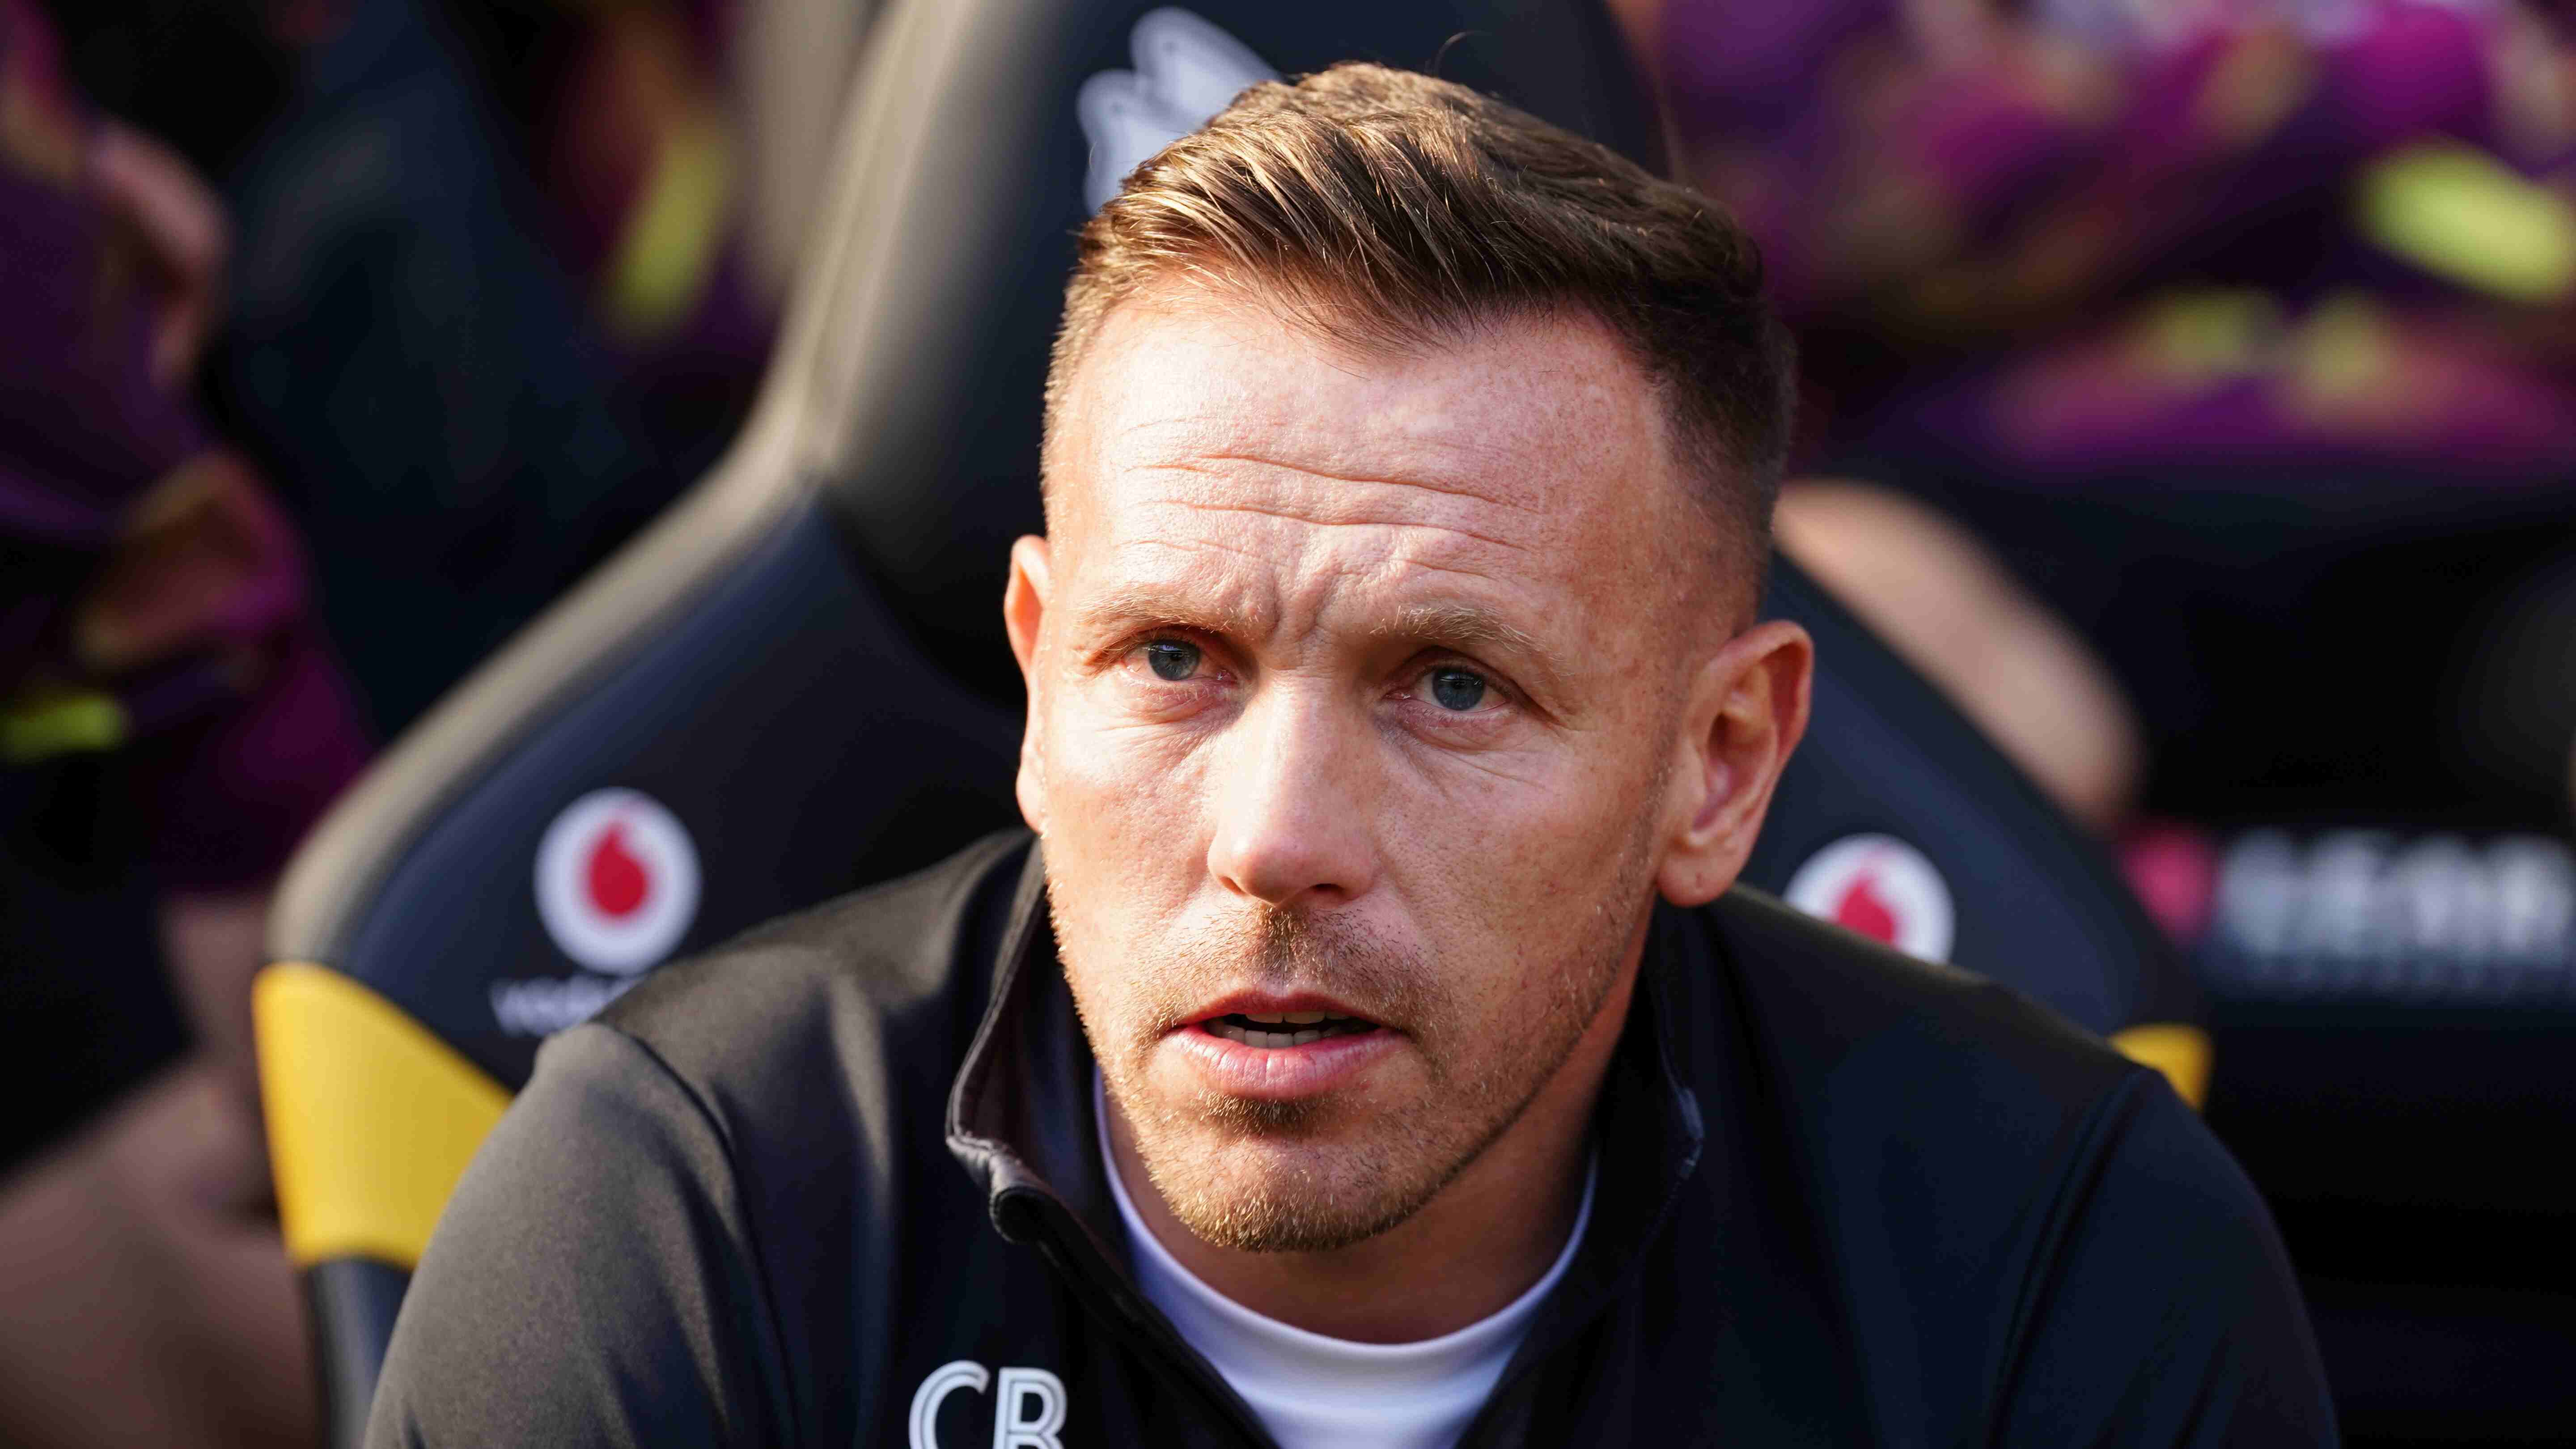 23 Intriguing Facts About Craig Bellamy - Facts.net